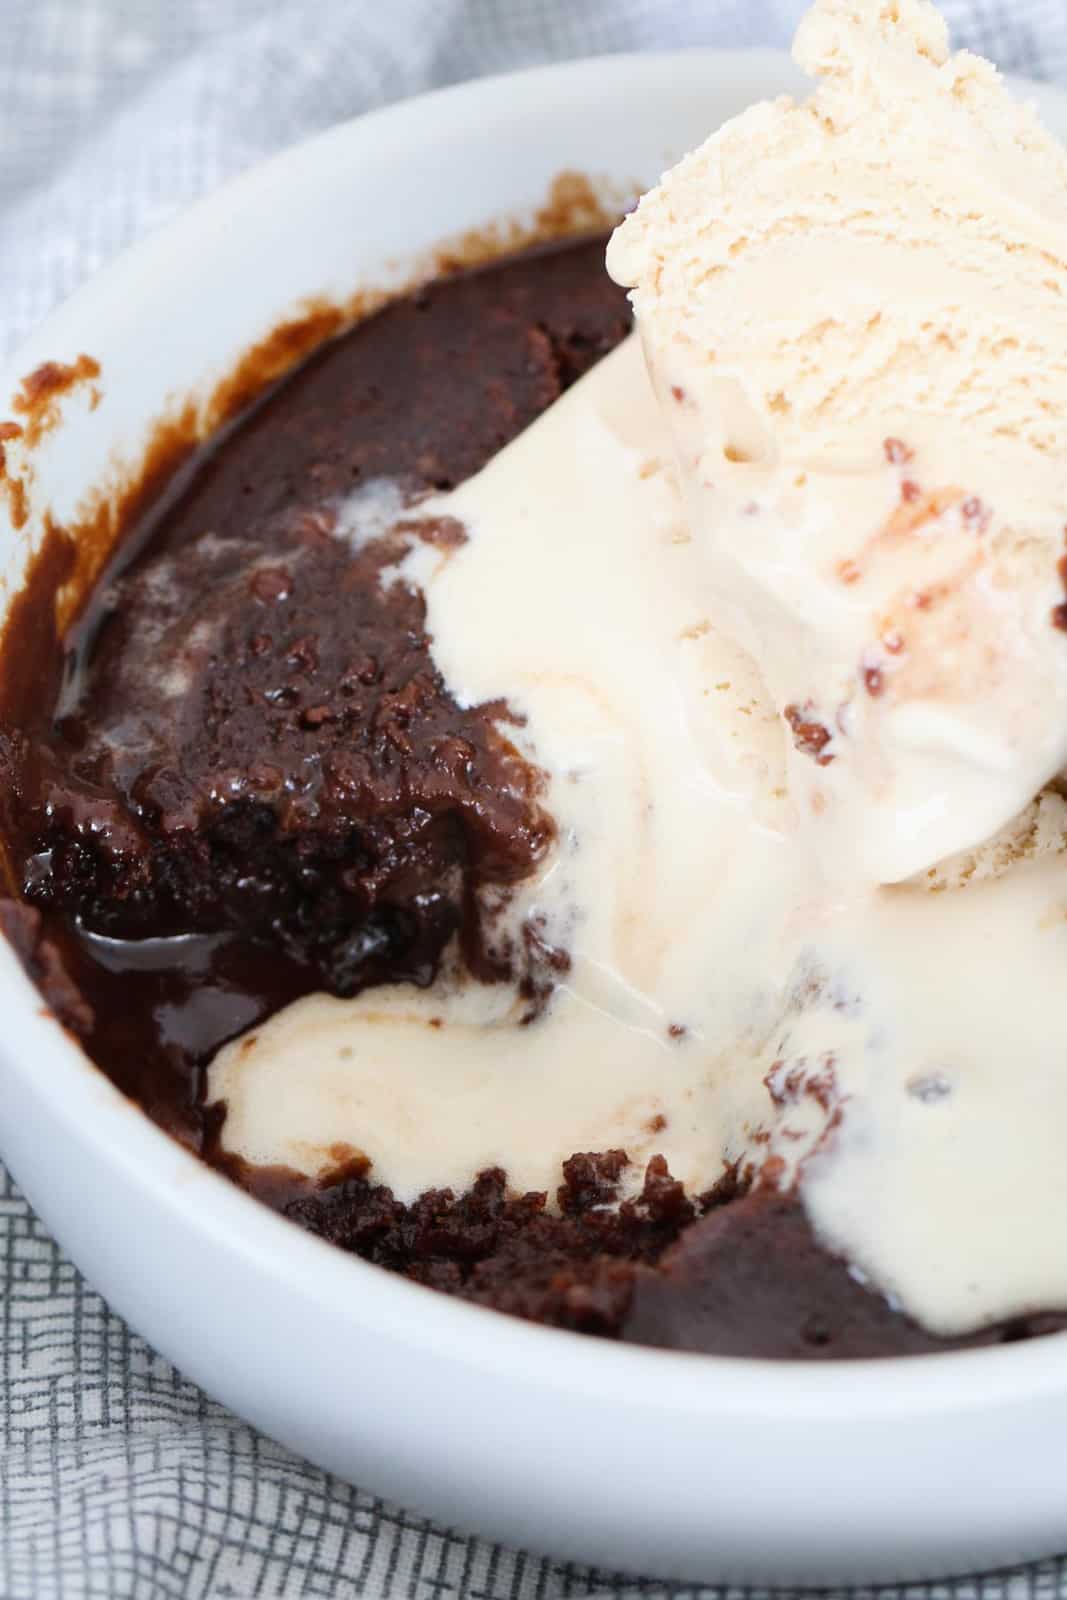 A close up view of chocolate brownie with ice cream in a small white bowl